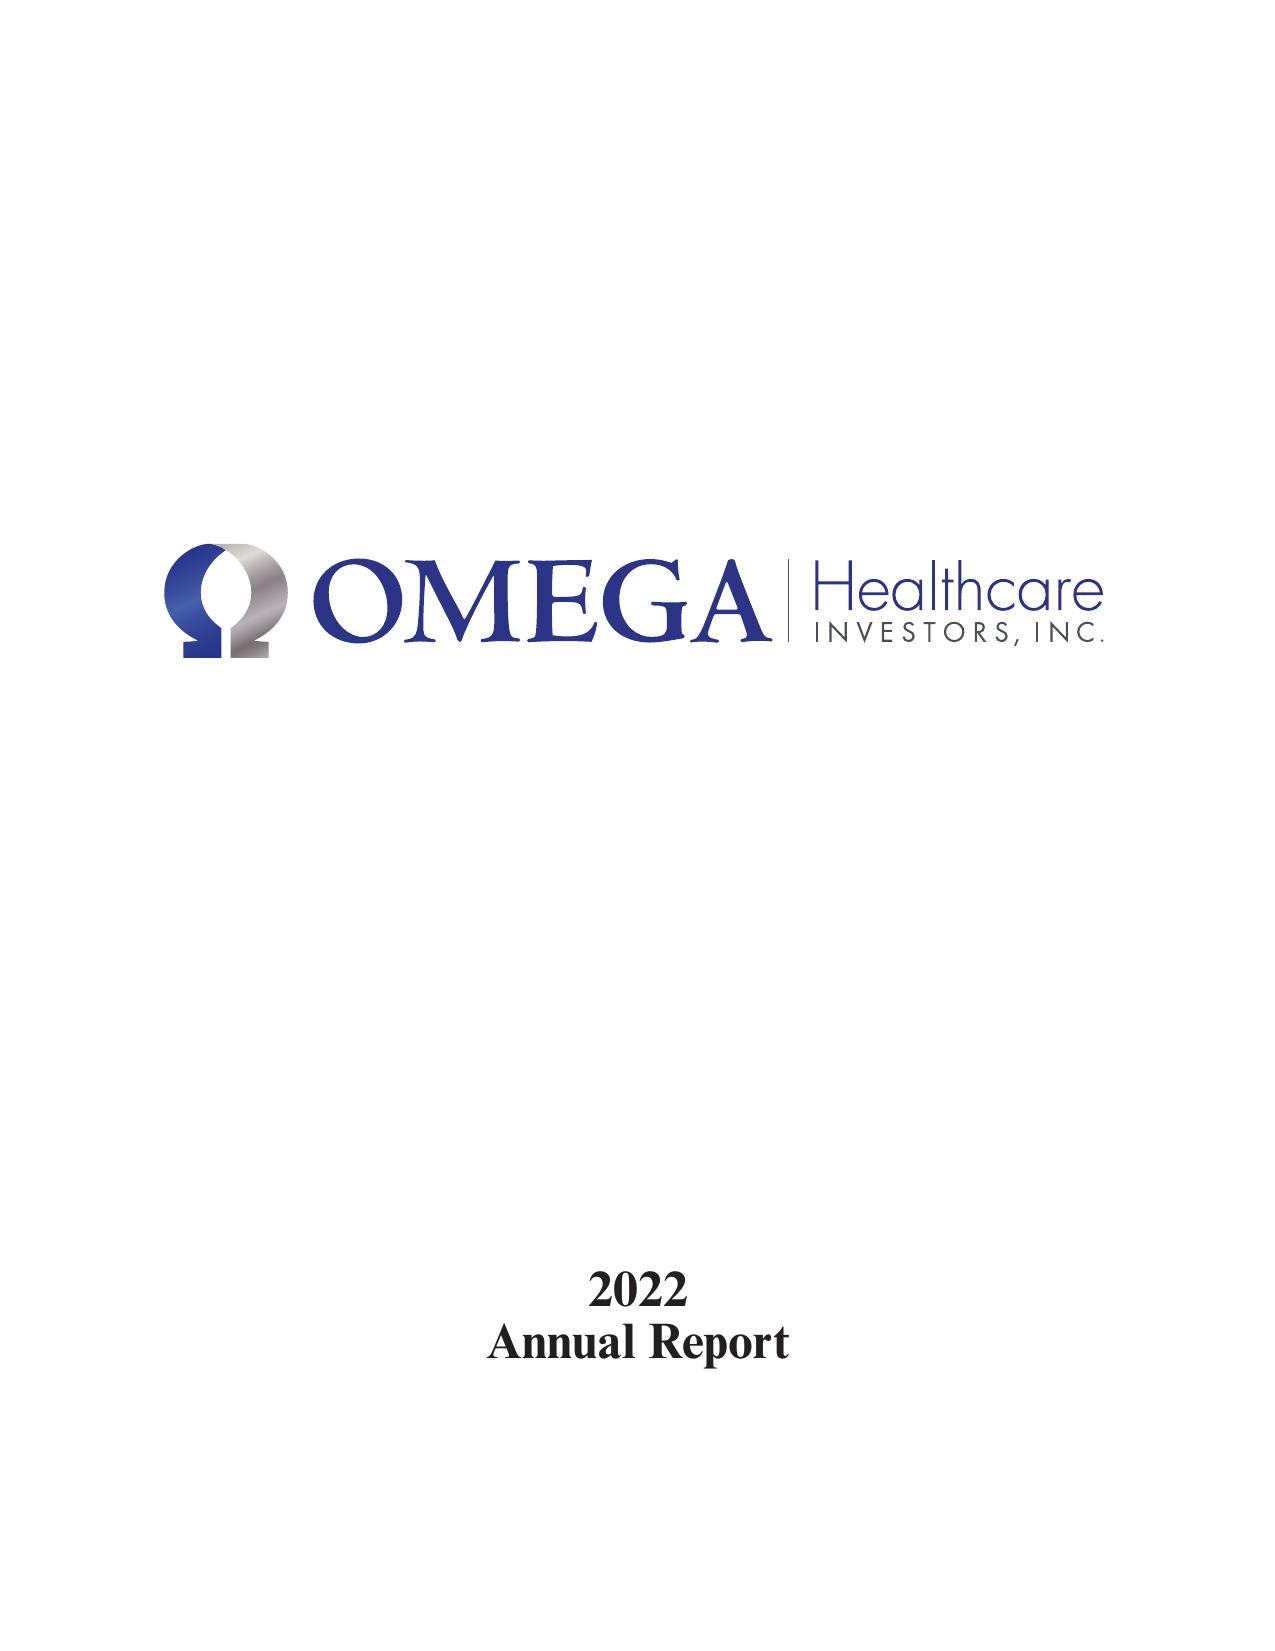 OMEGAHEALTHCARE 2022 Annual Report